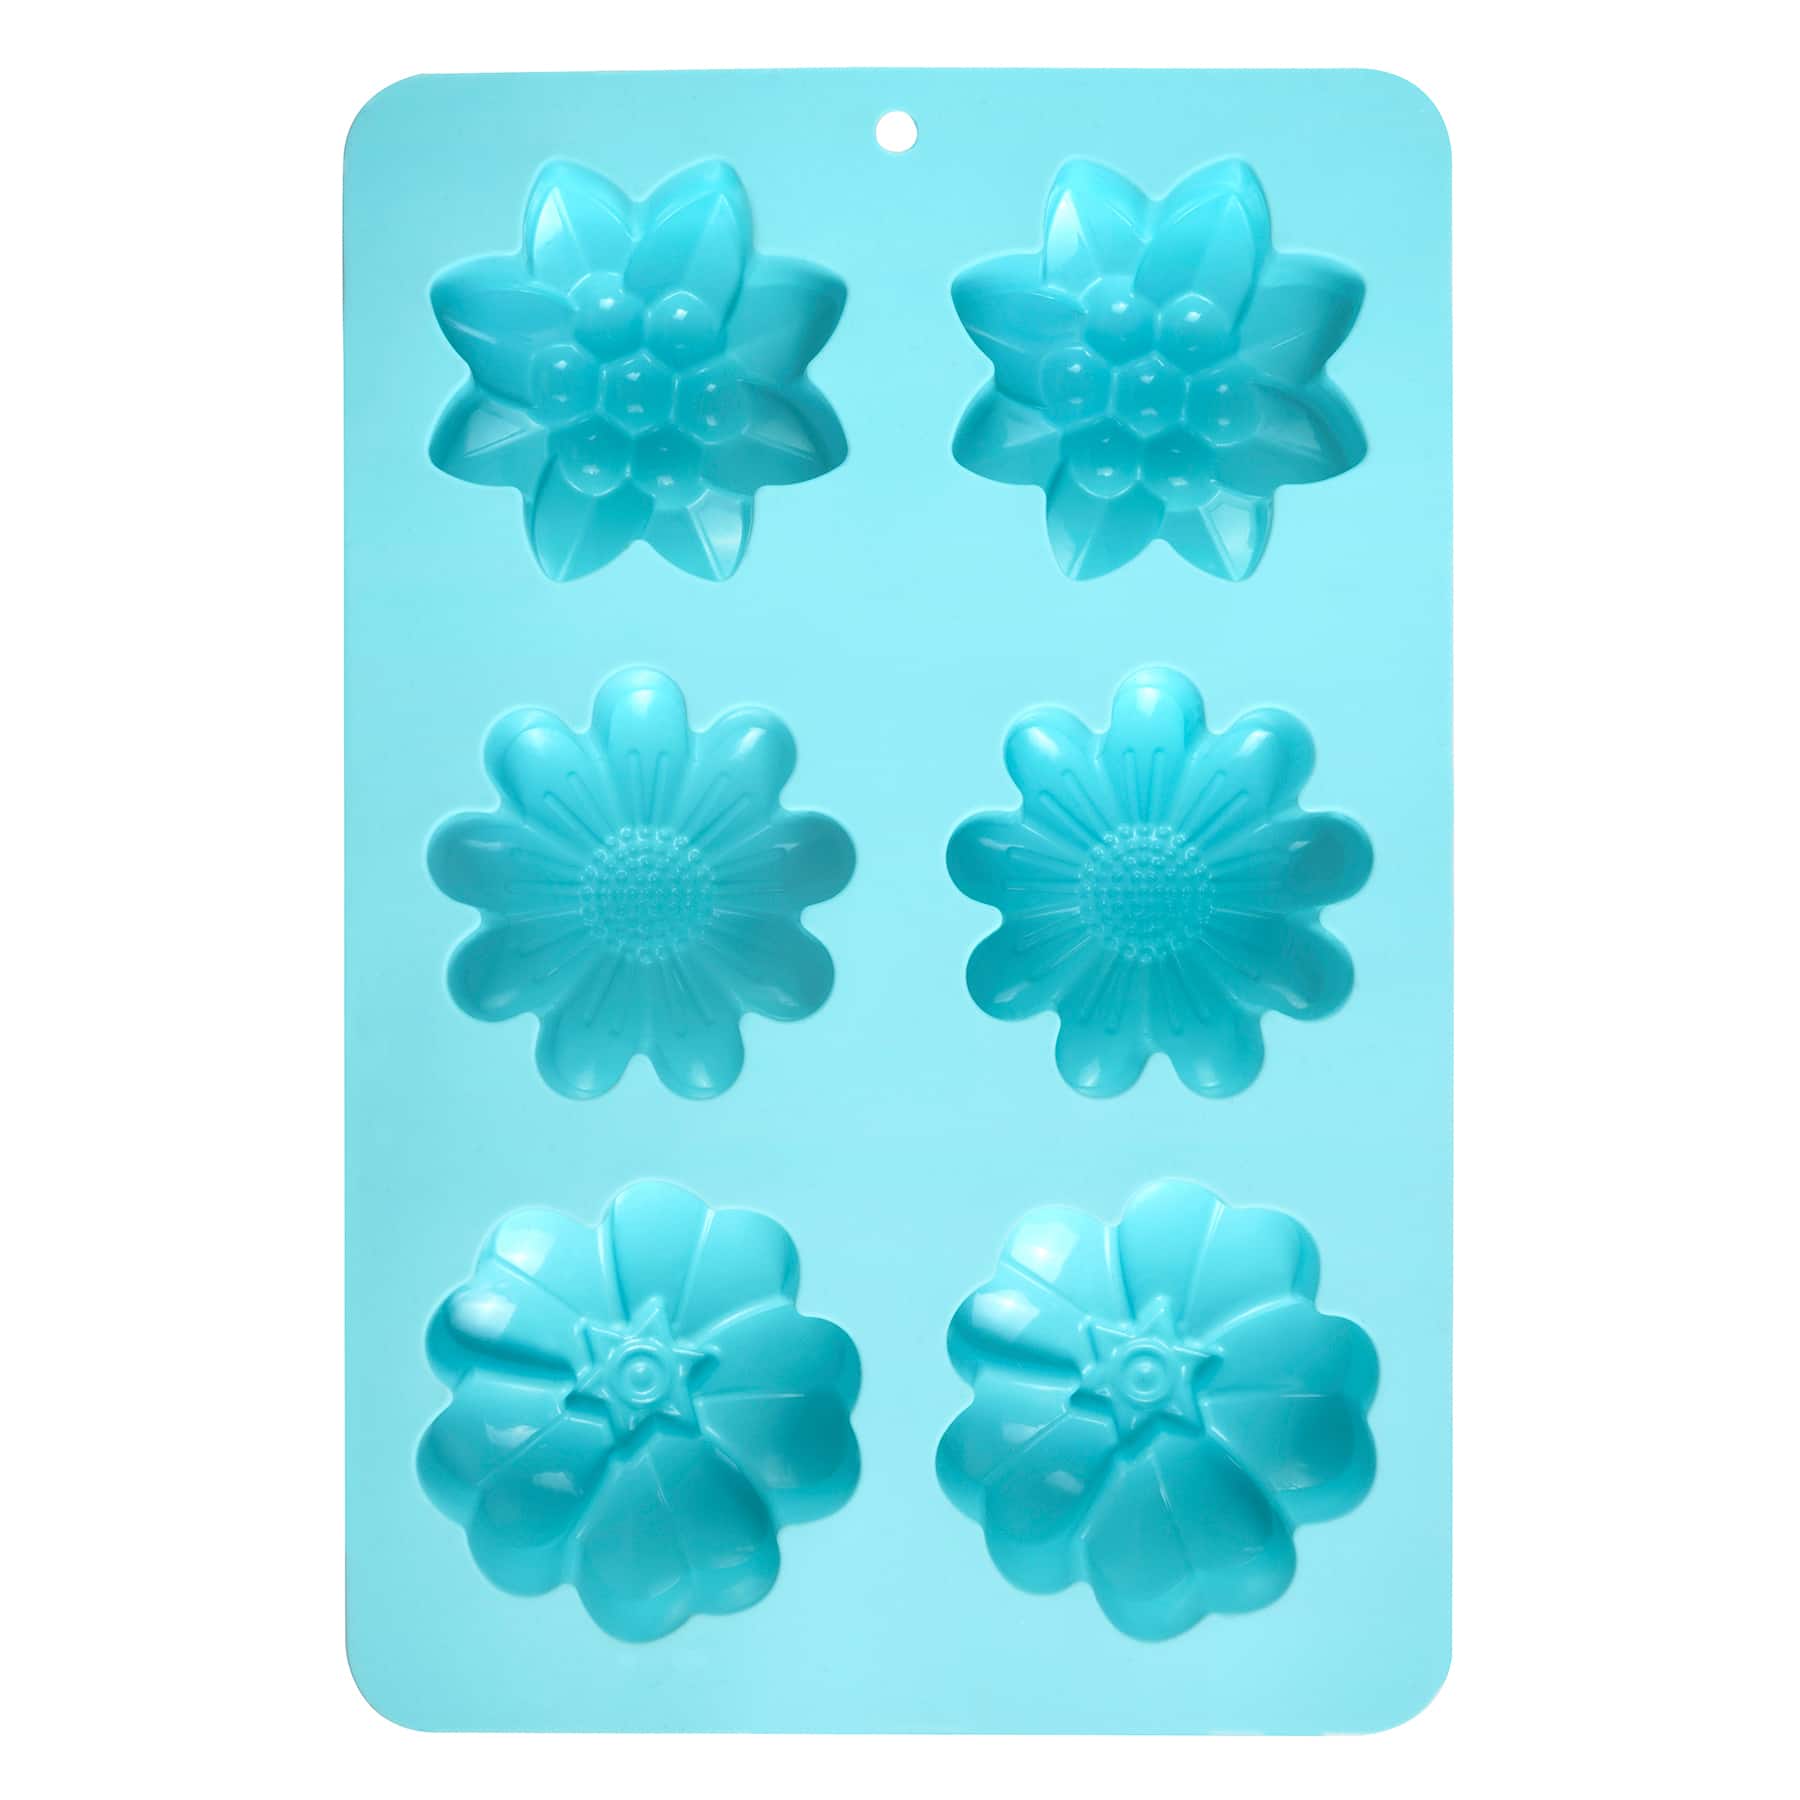 3 Pieces Set of Silicone Flower Molds, Baking Mold with Flowers